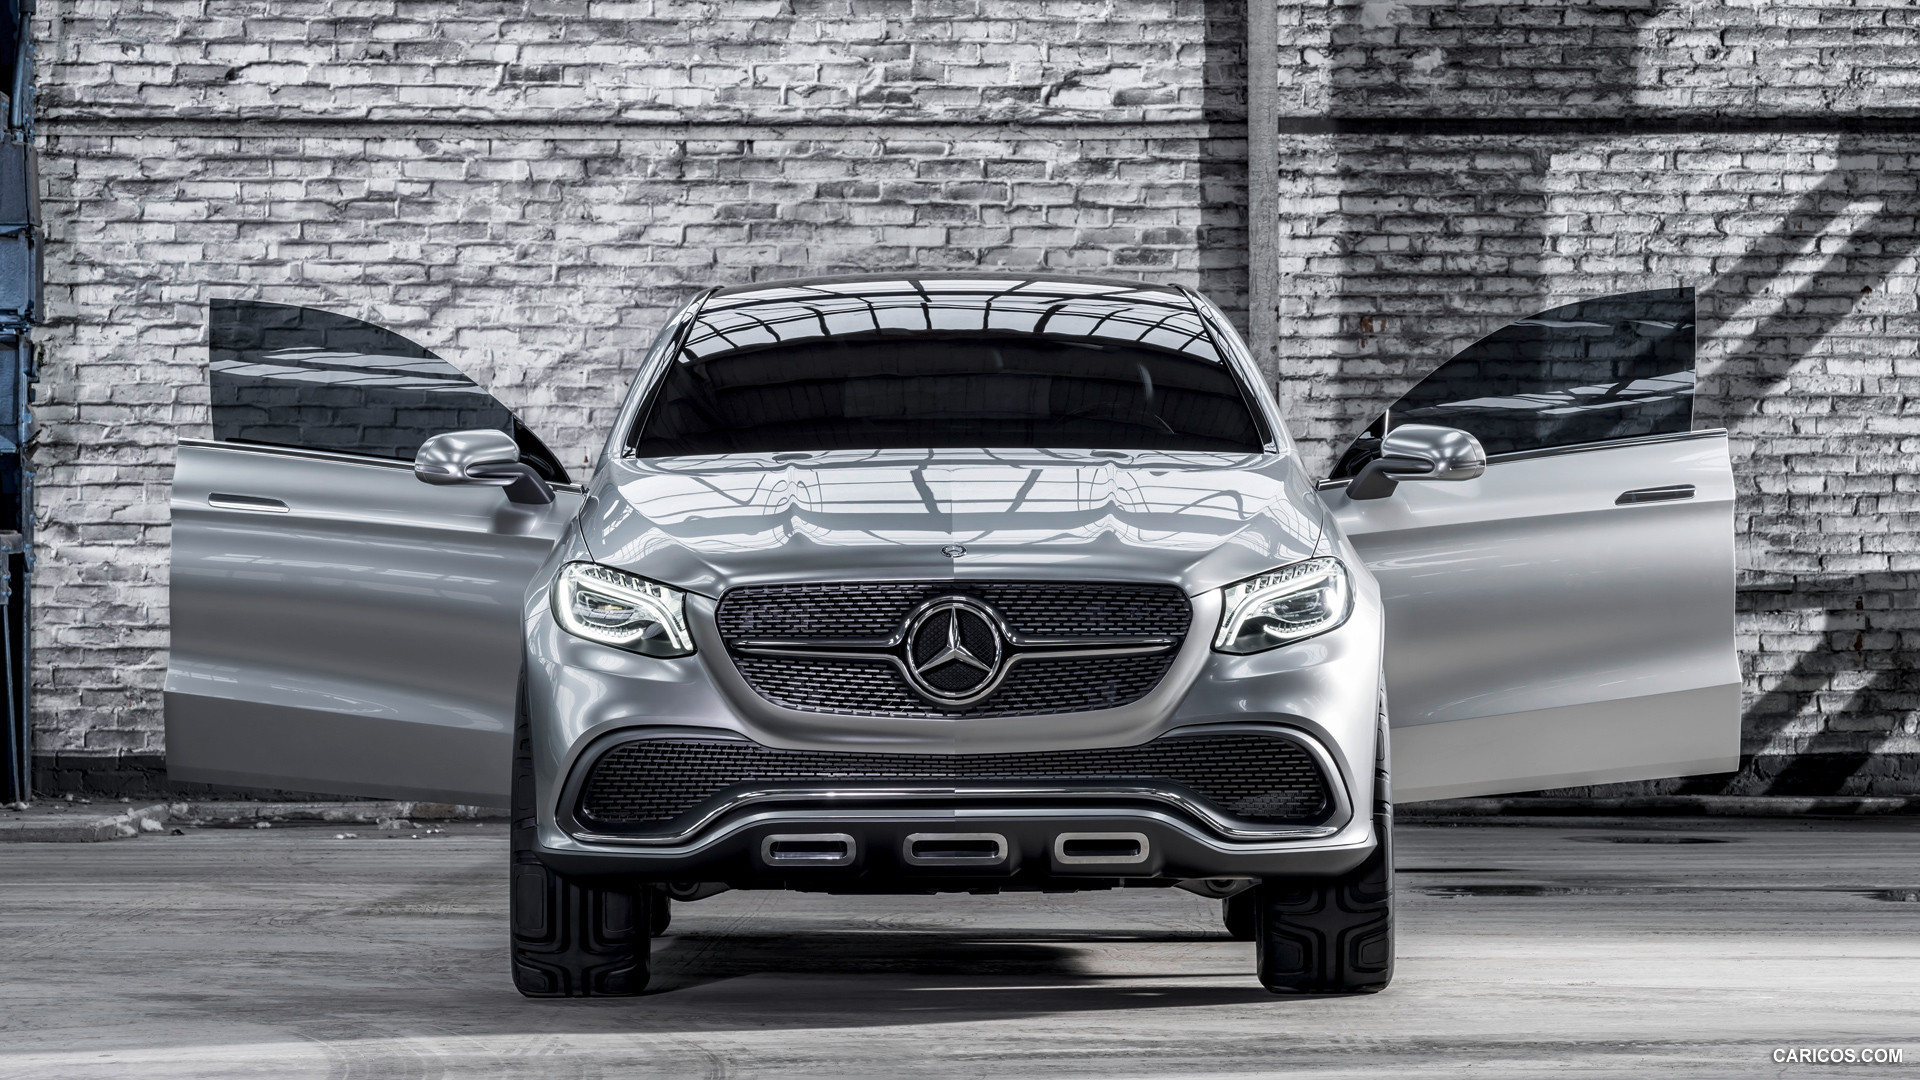 2014 Mercedes-Benz Coupe SUV Concept  - Front, #6 of 17